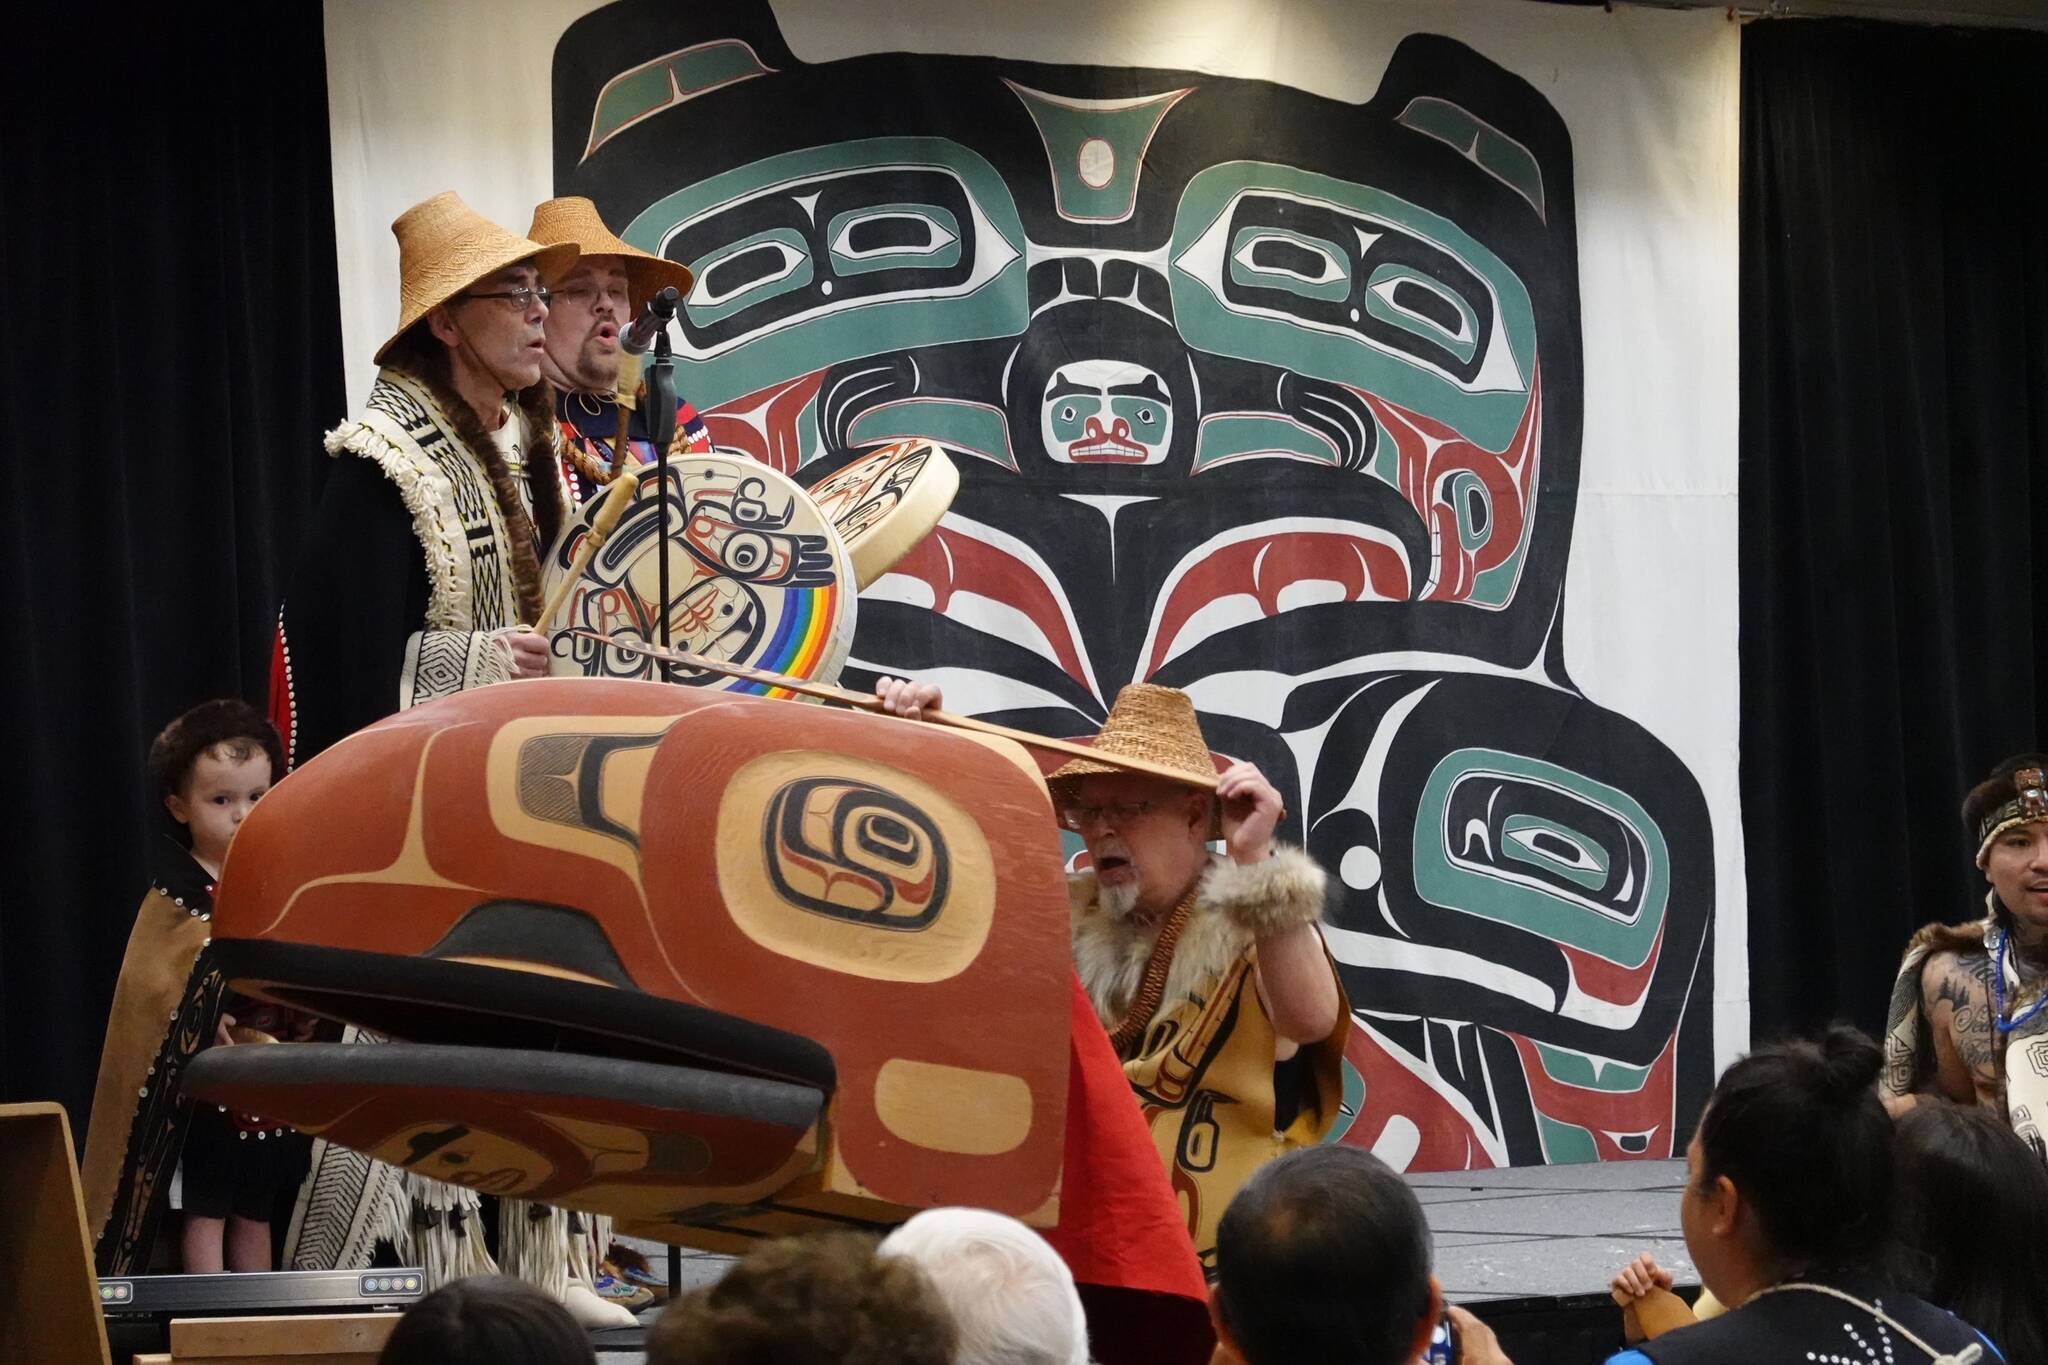 David A. Boxley, wearing a Ravenstail-trimmed robe, and his son David R. Boxley sing and drum in Elizabeth Peratrovich Hall on Saturday afternoon as Metlakatla’s Git Hoan dancers perform a canoe paddling dance featuring a large carved headdress created by Git Hoan’s senior Boxley. (Laurie Craig / Juneau Empire)